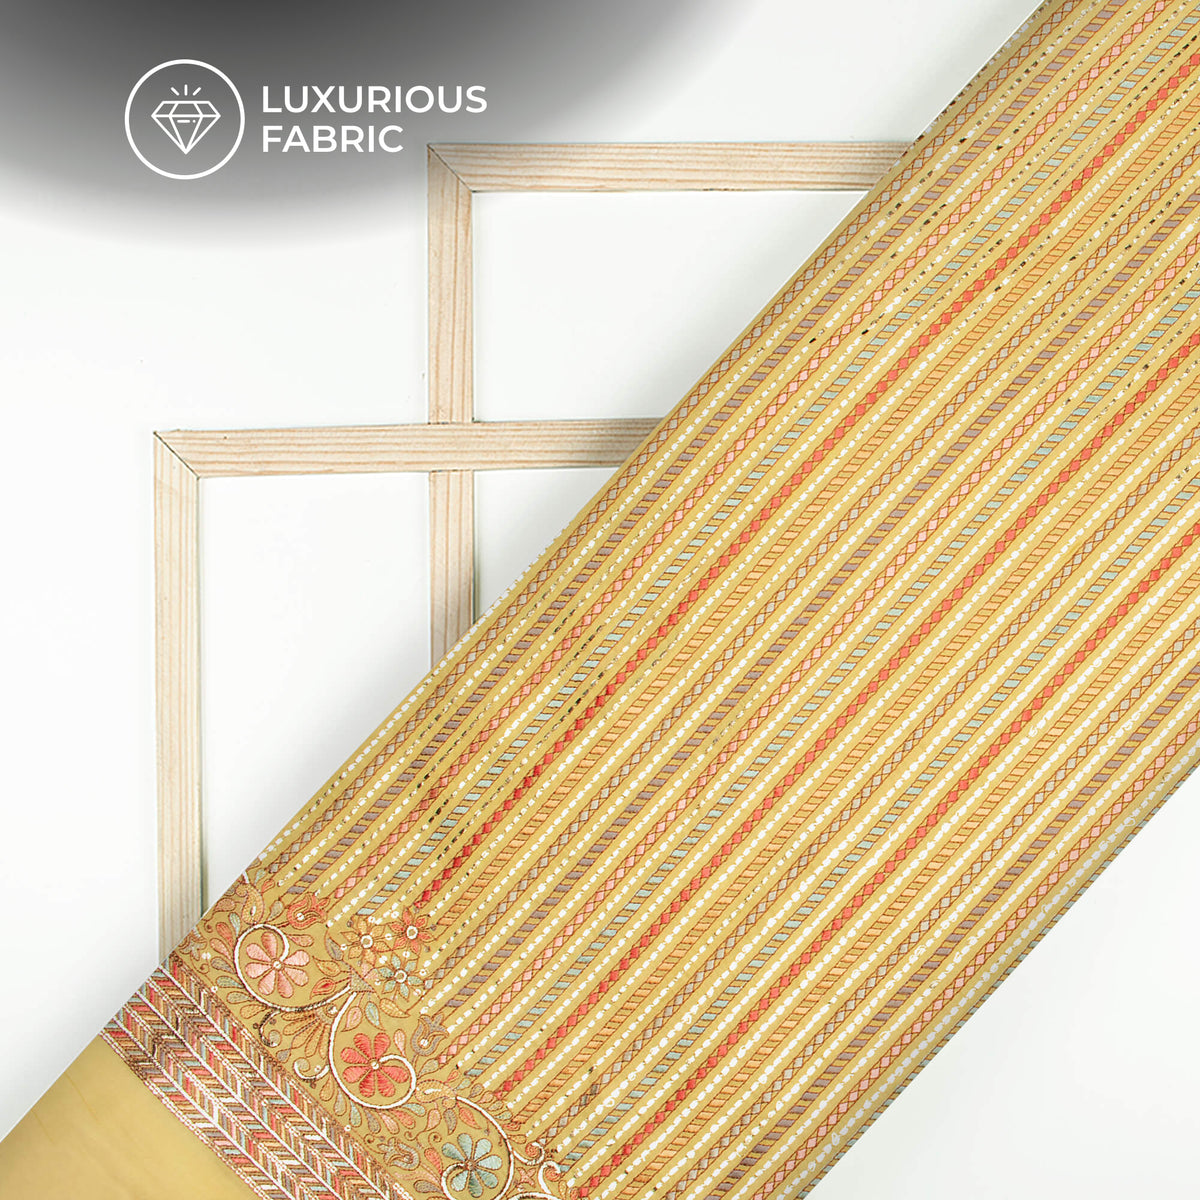 Beautiful Stripes With Gold Foil Embroidery On Glazed Cotton Fabric